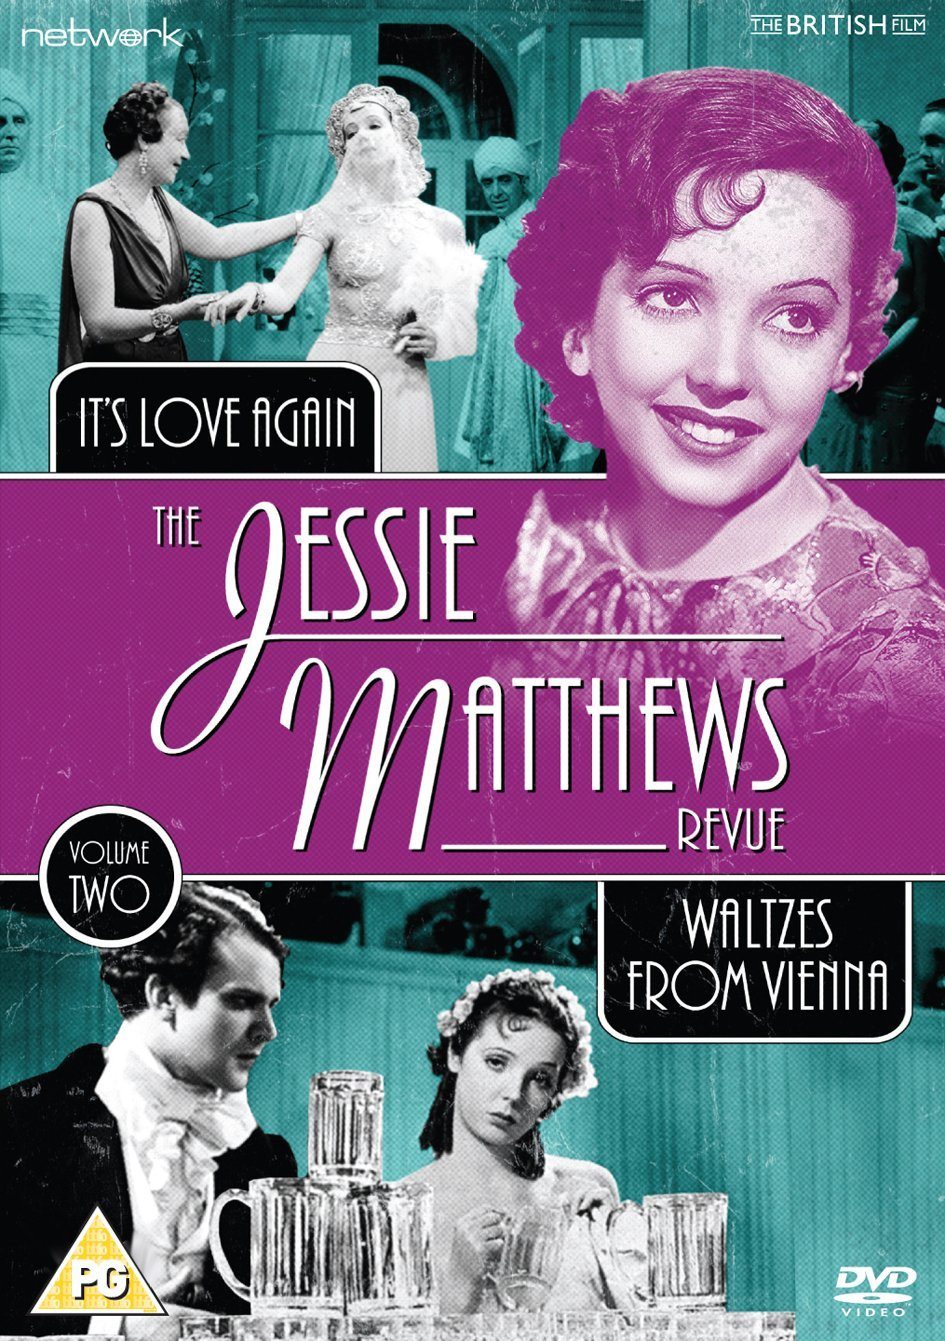 The Jessie Matthews Revue Volume Two from Network and The British Film. Features It’s Love Again and Waltzes from Vienna